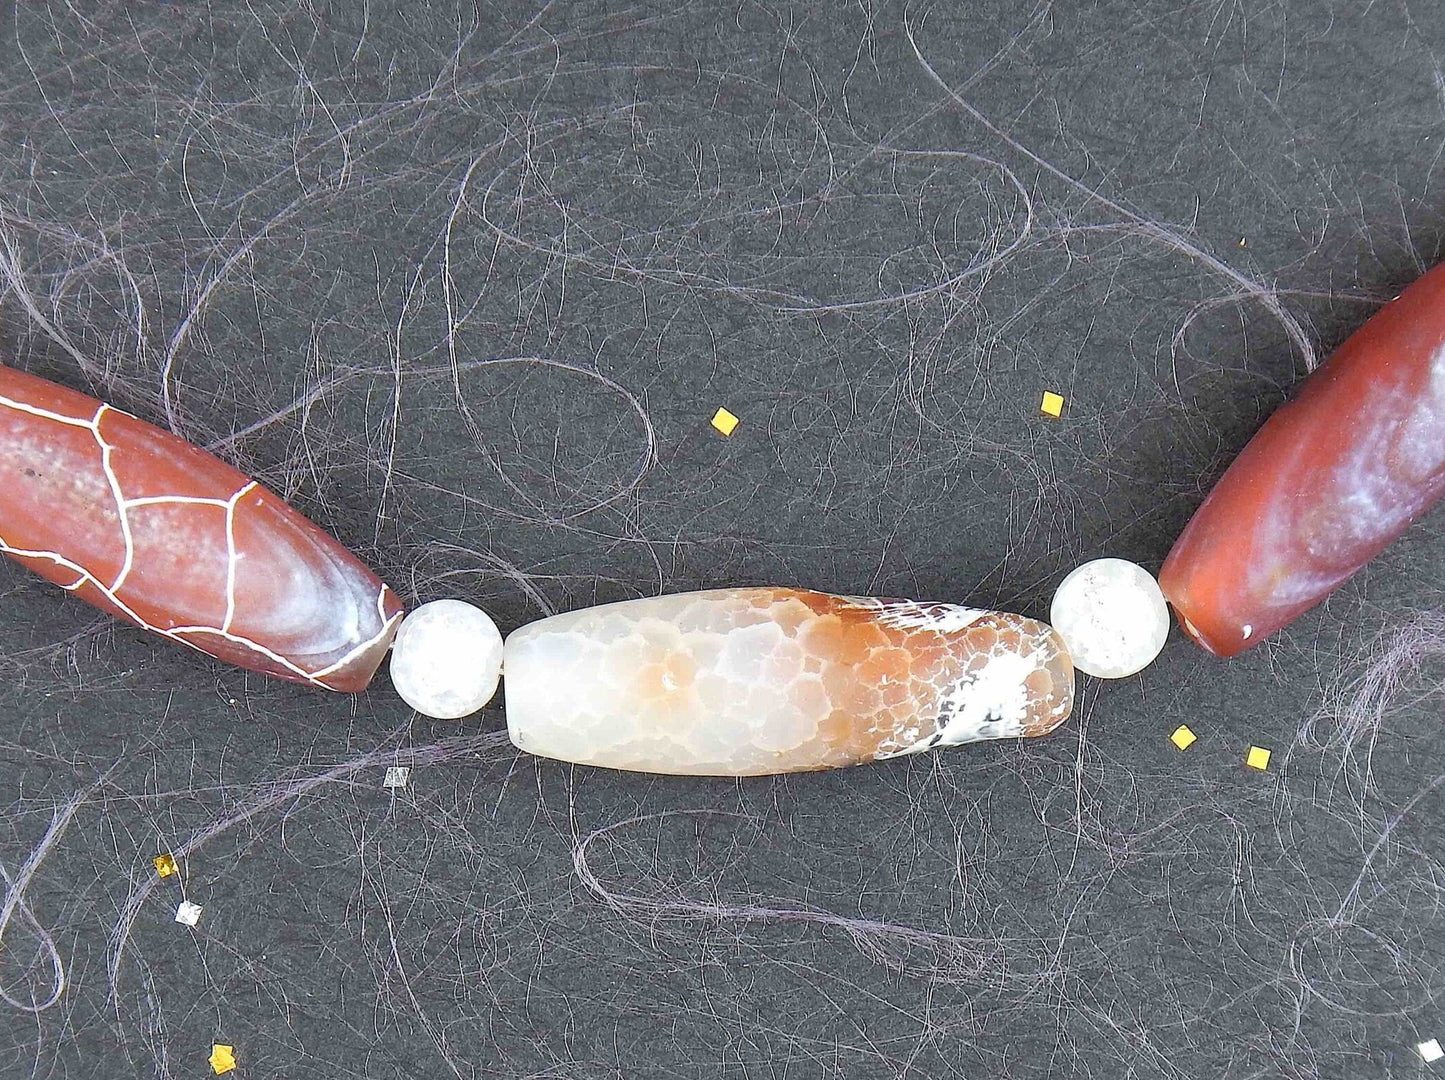 Choker necklace with 3 fire-cracked agate stone beads in red-brown-caramel-white tones, stainless steel clasp